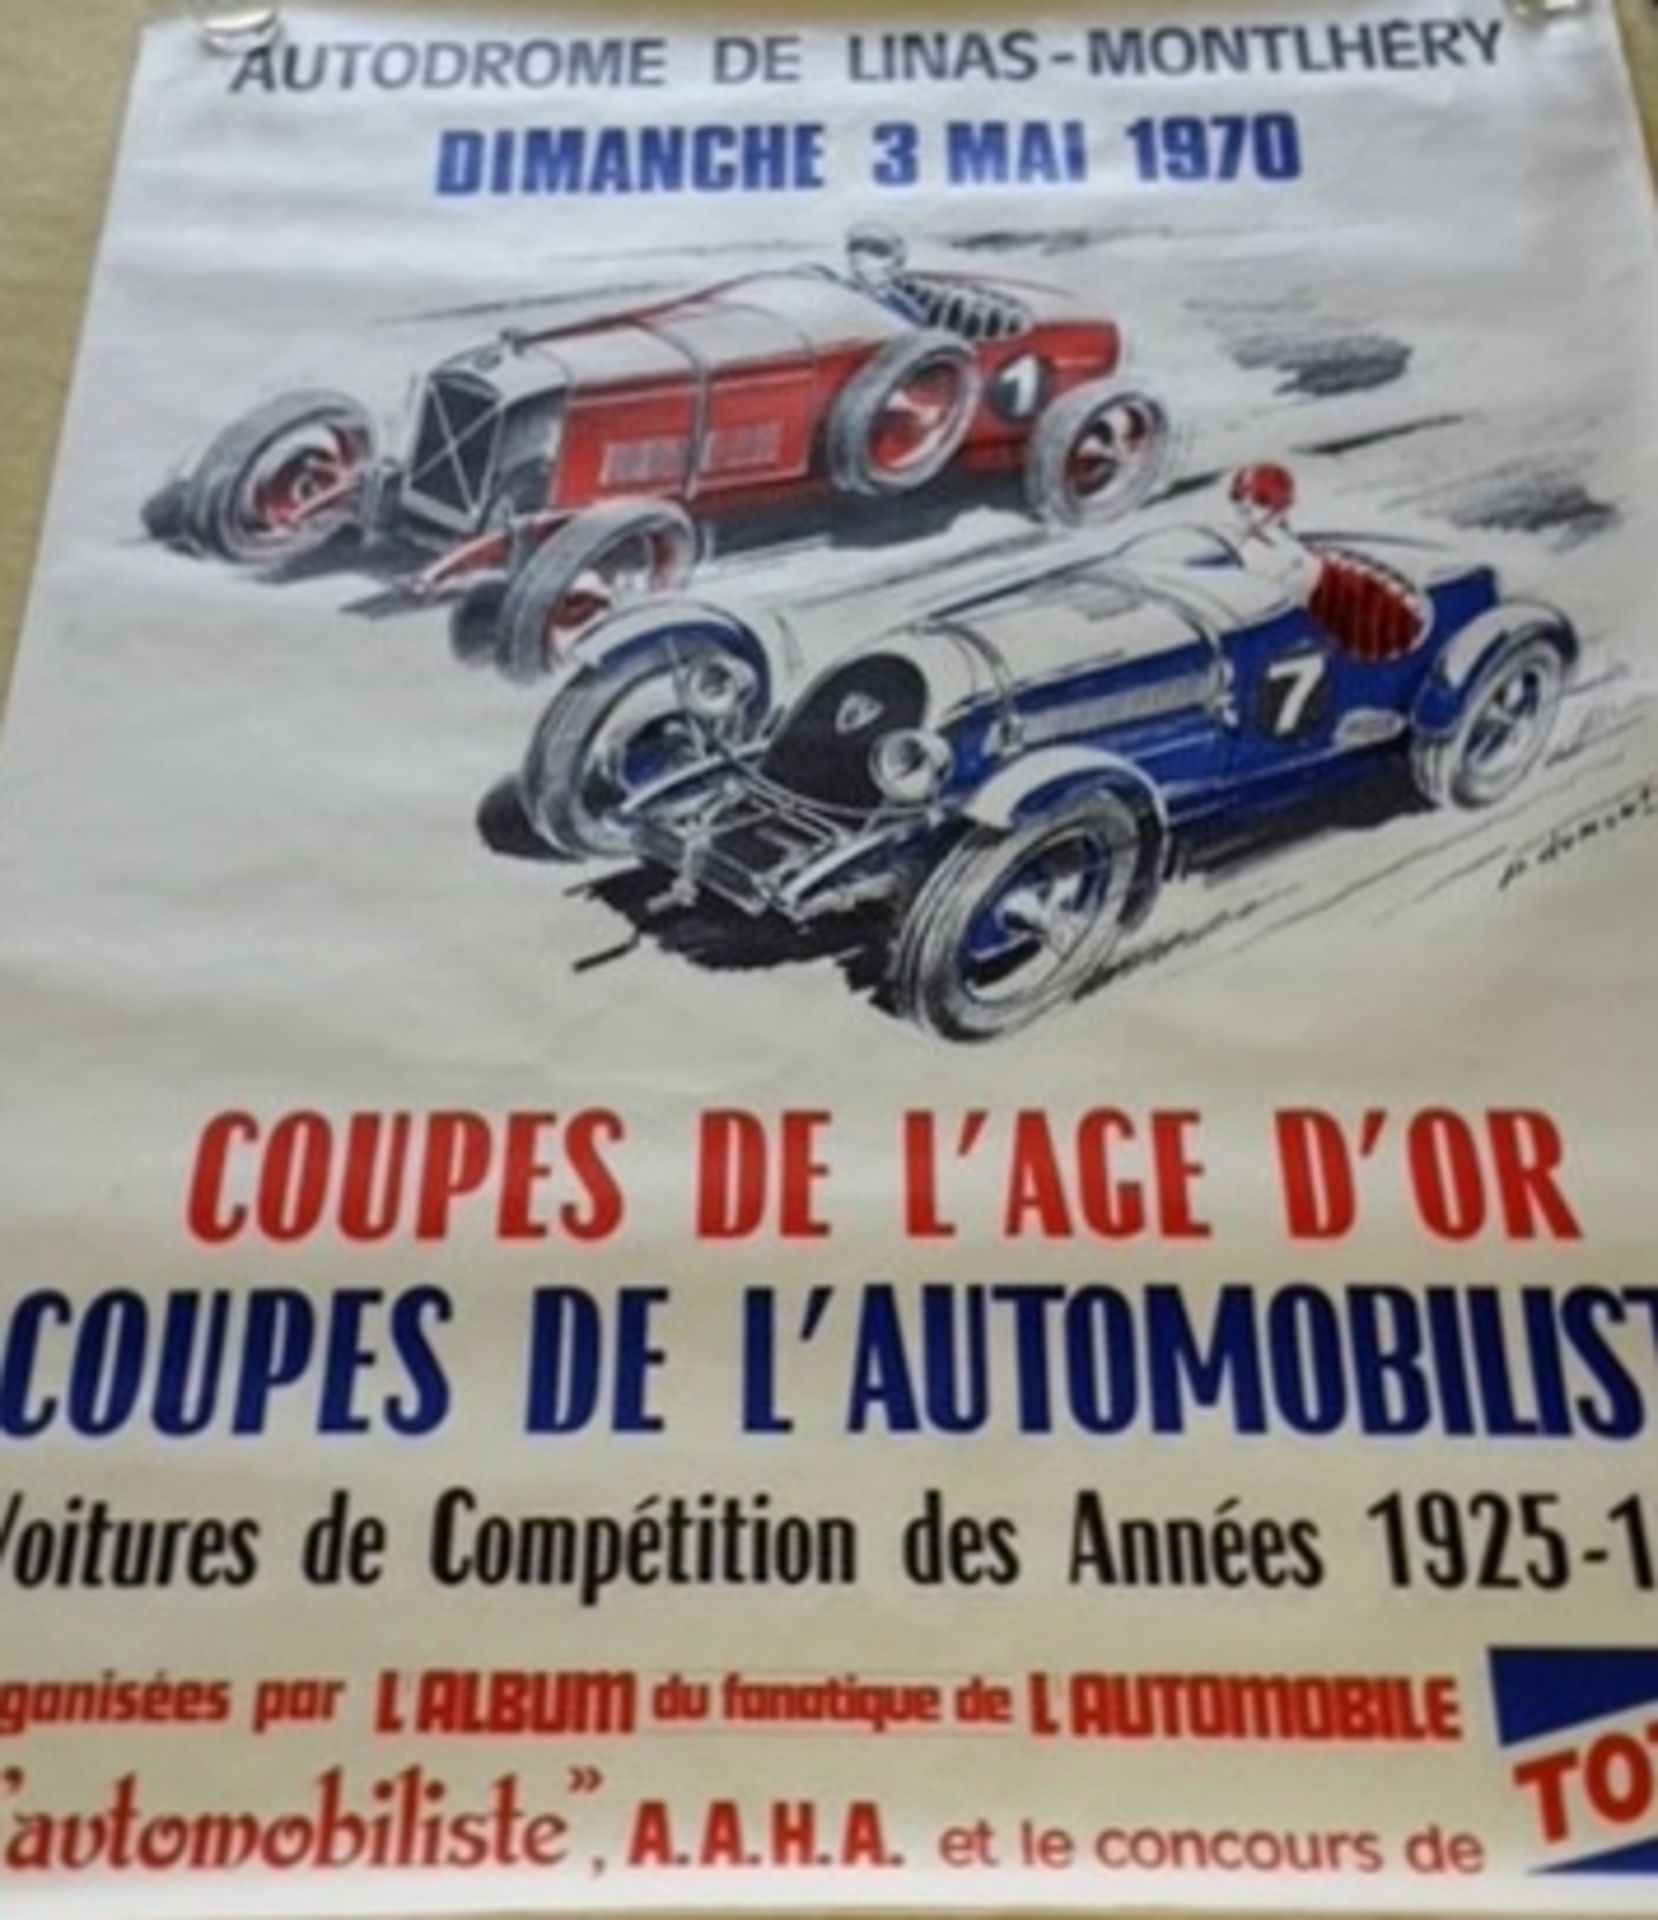 Motorsport related posters.